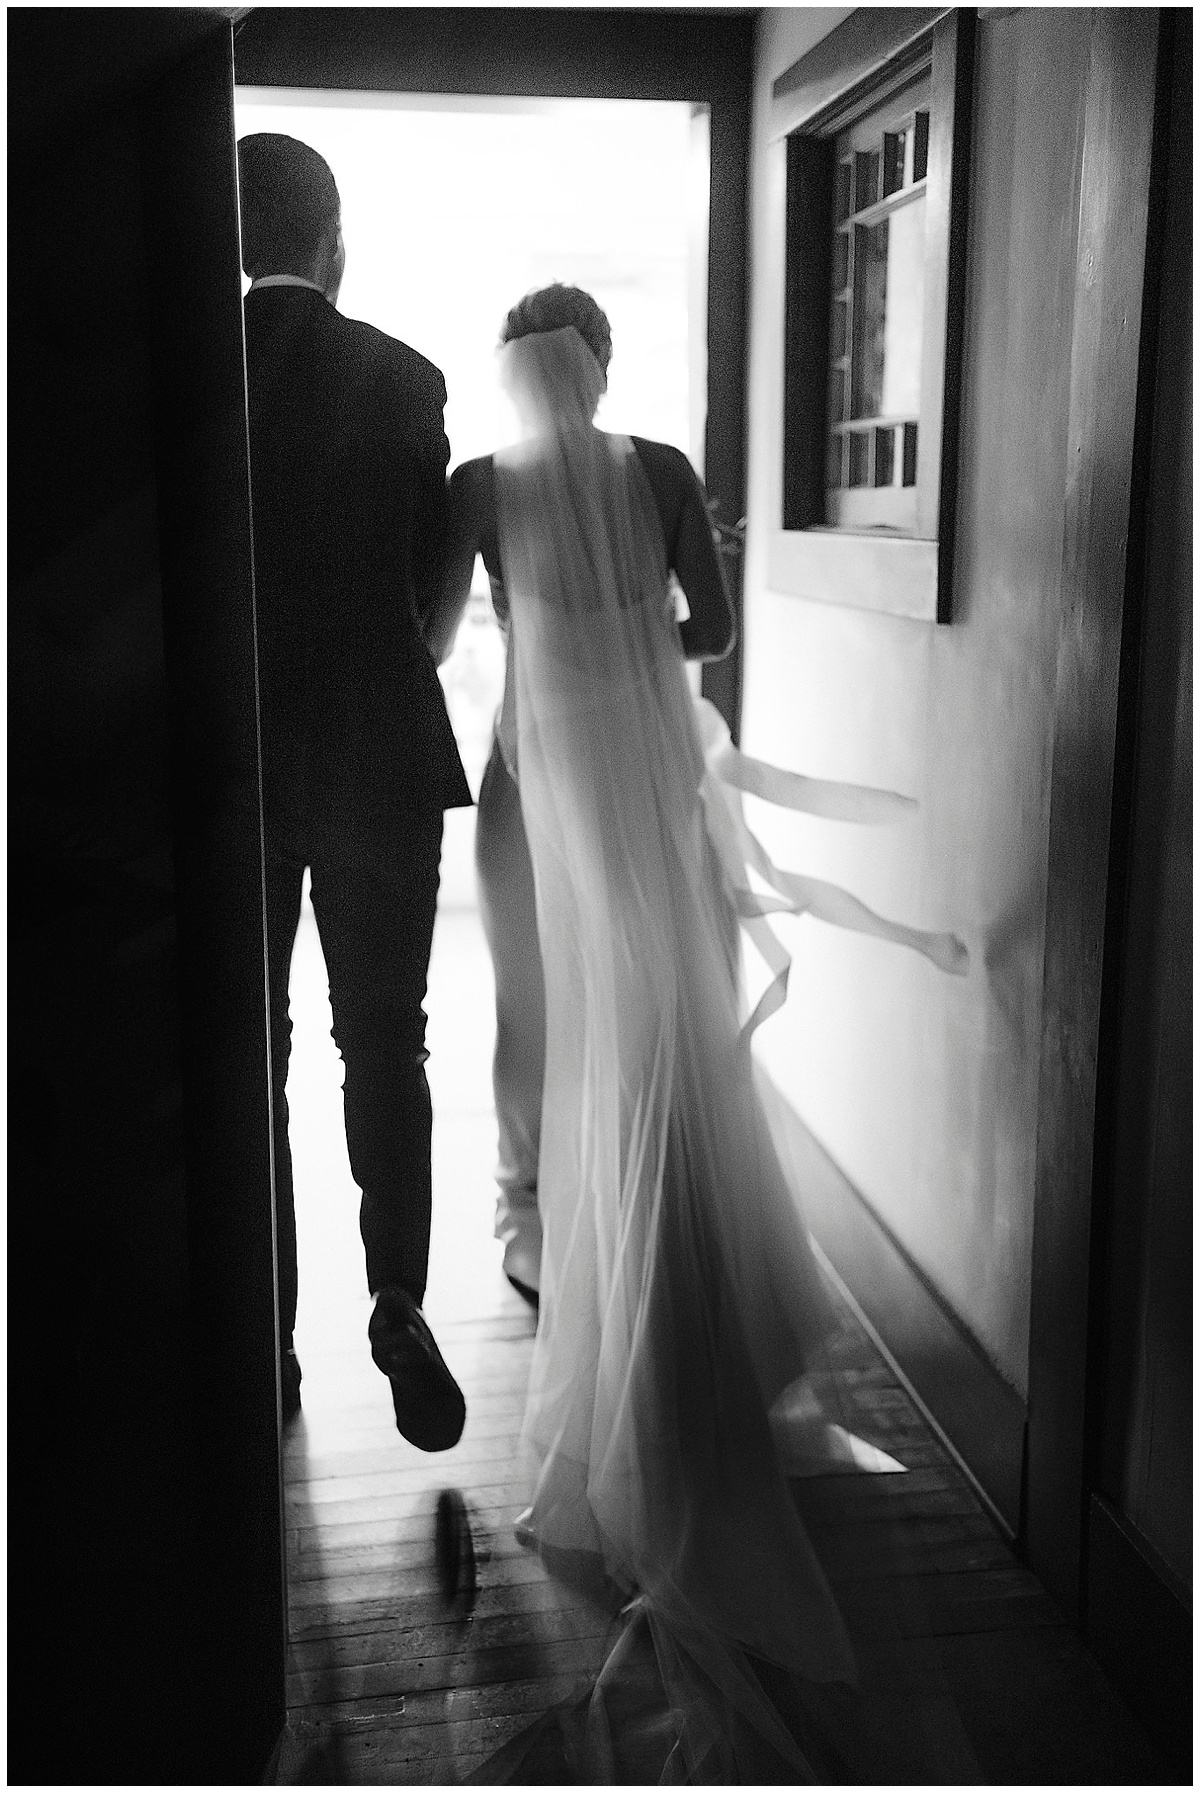 a bride and groom in silhouette as they walk down a hallway into a well-lit reception hall with the bride's cathedral veil trailing behind them